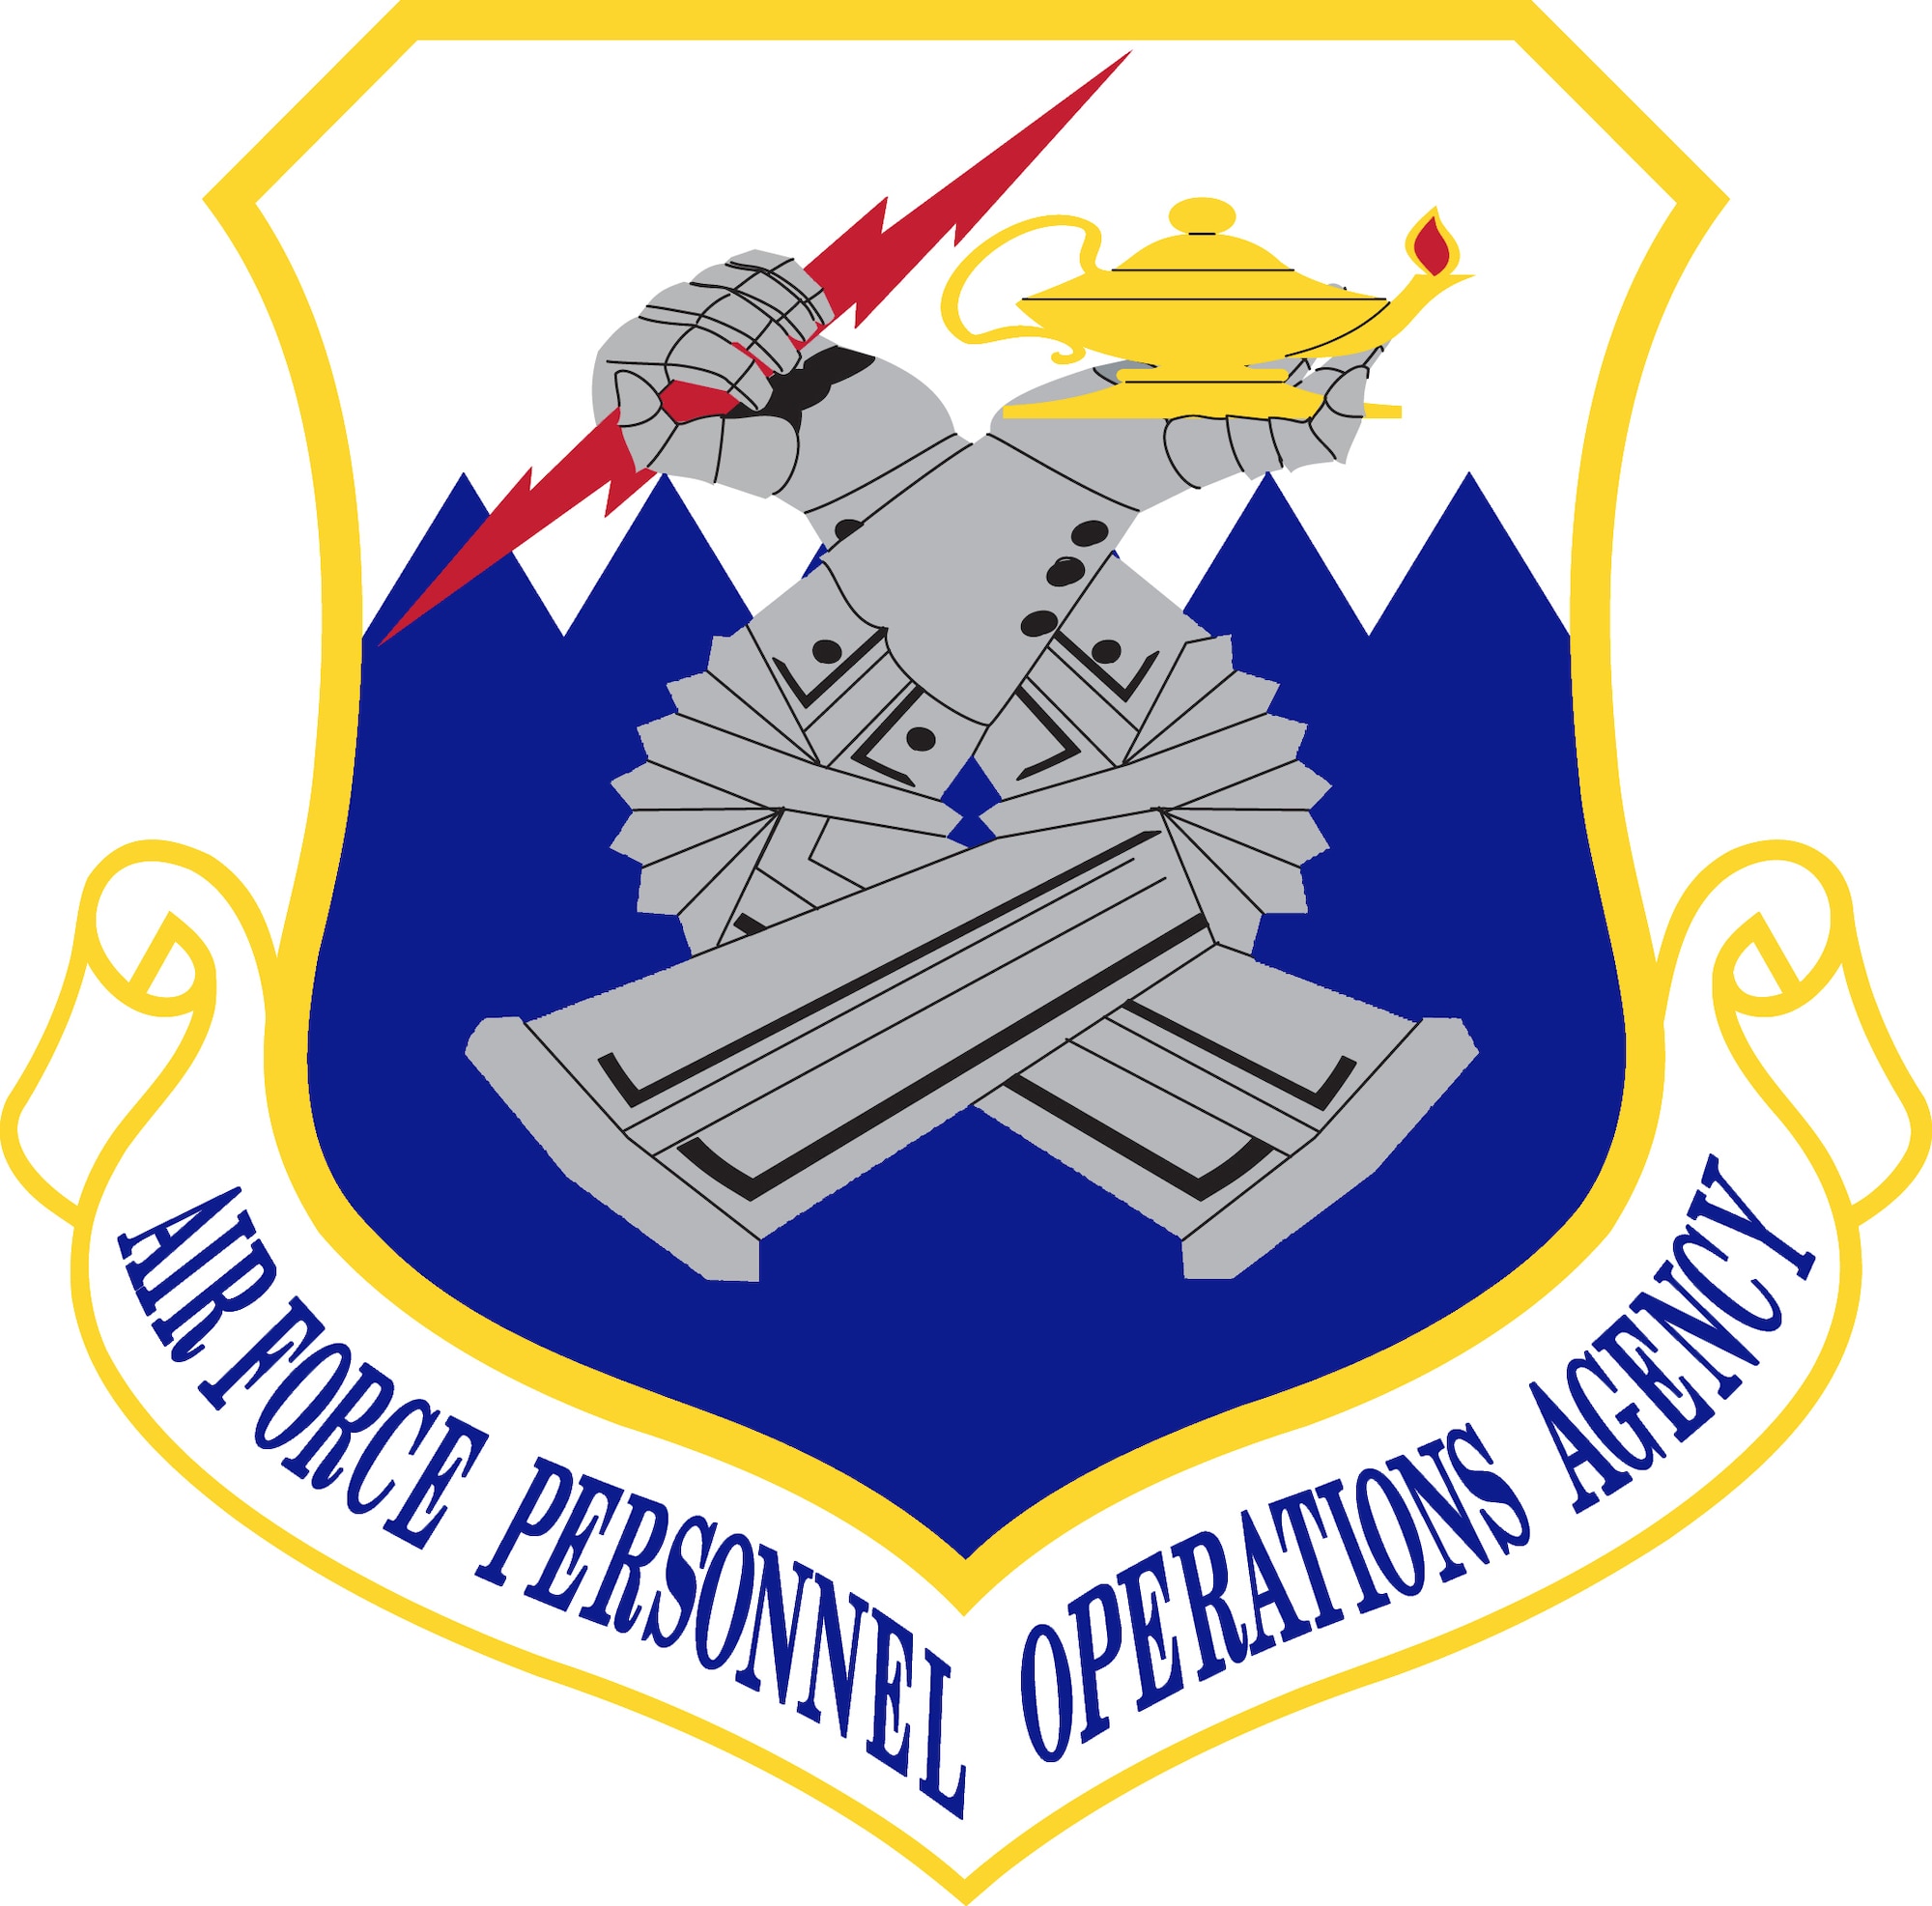 Air Force Personnel Operations Agency shield (color), Image provided by the Institute of Heraldry. In accordance with Chapter 3 of AFI 84-105, commercial reproduction of this emblem is NOT permitted without the permission of the proponent organizational/unit commander. Image is 7x7 inches @ 300 ppi.